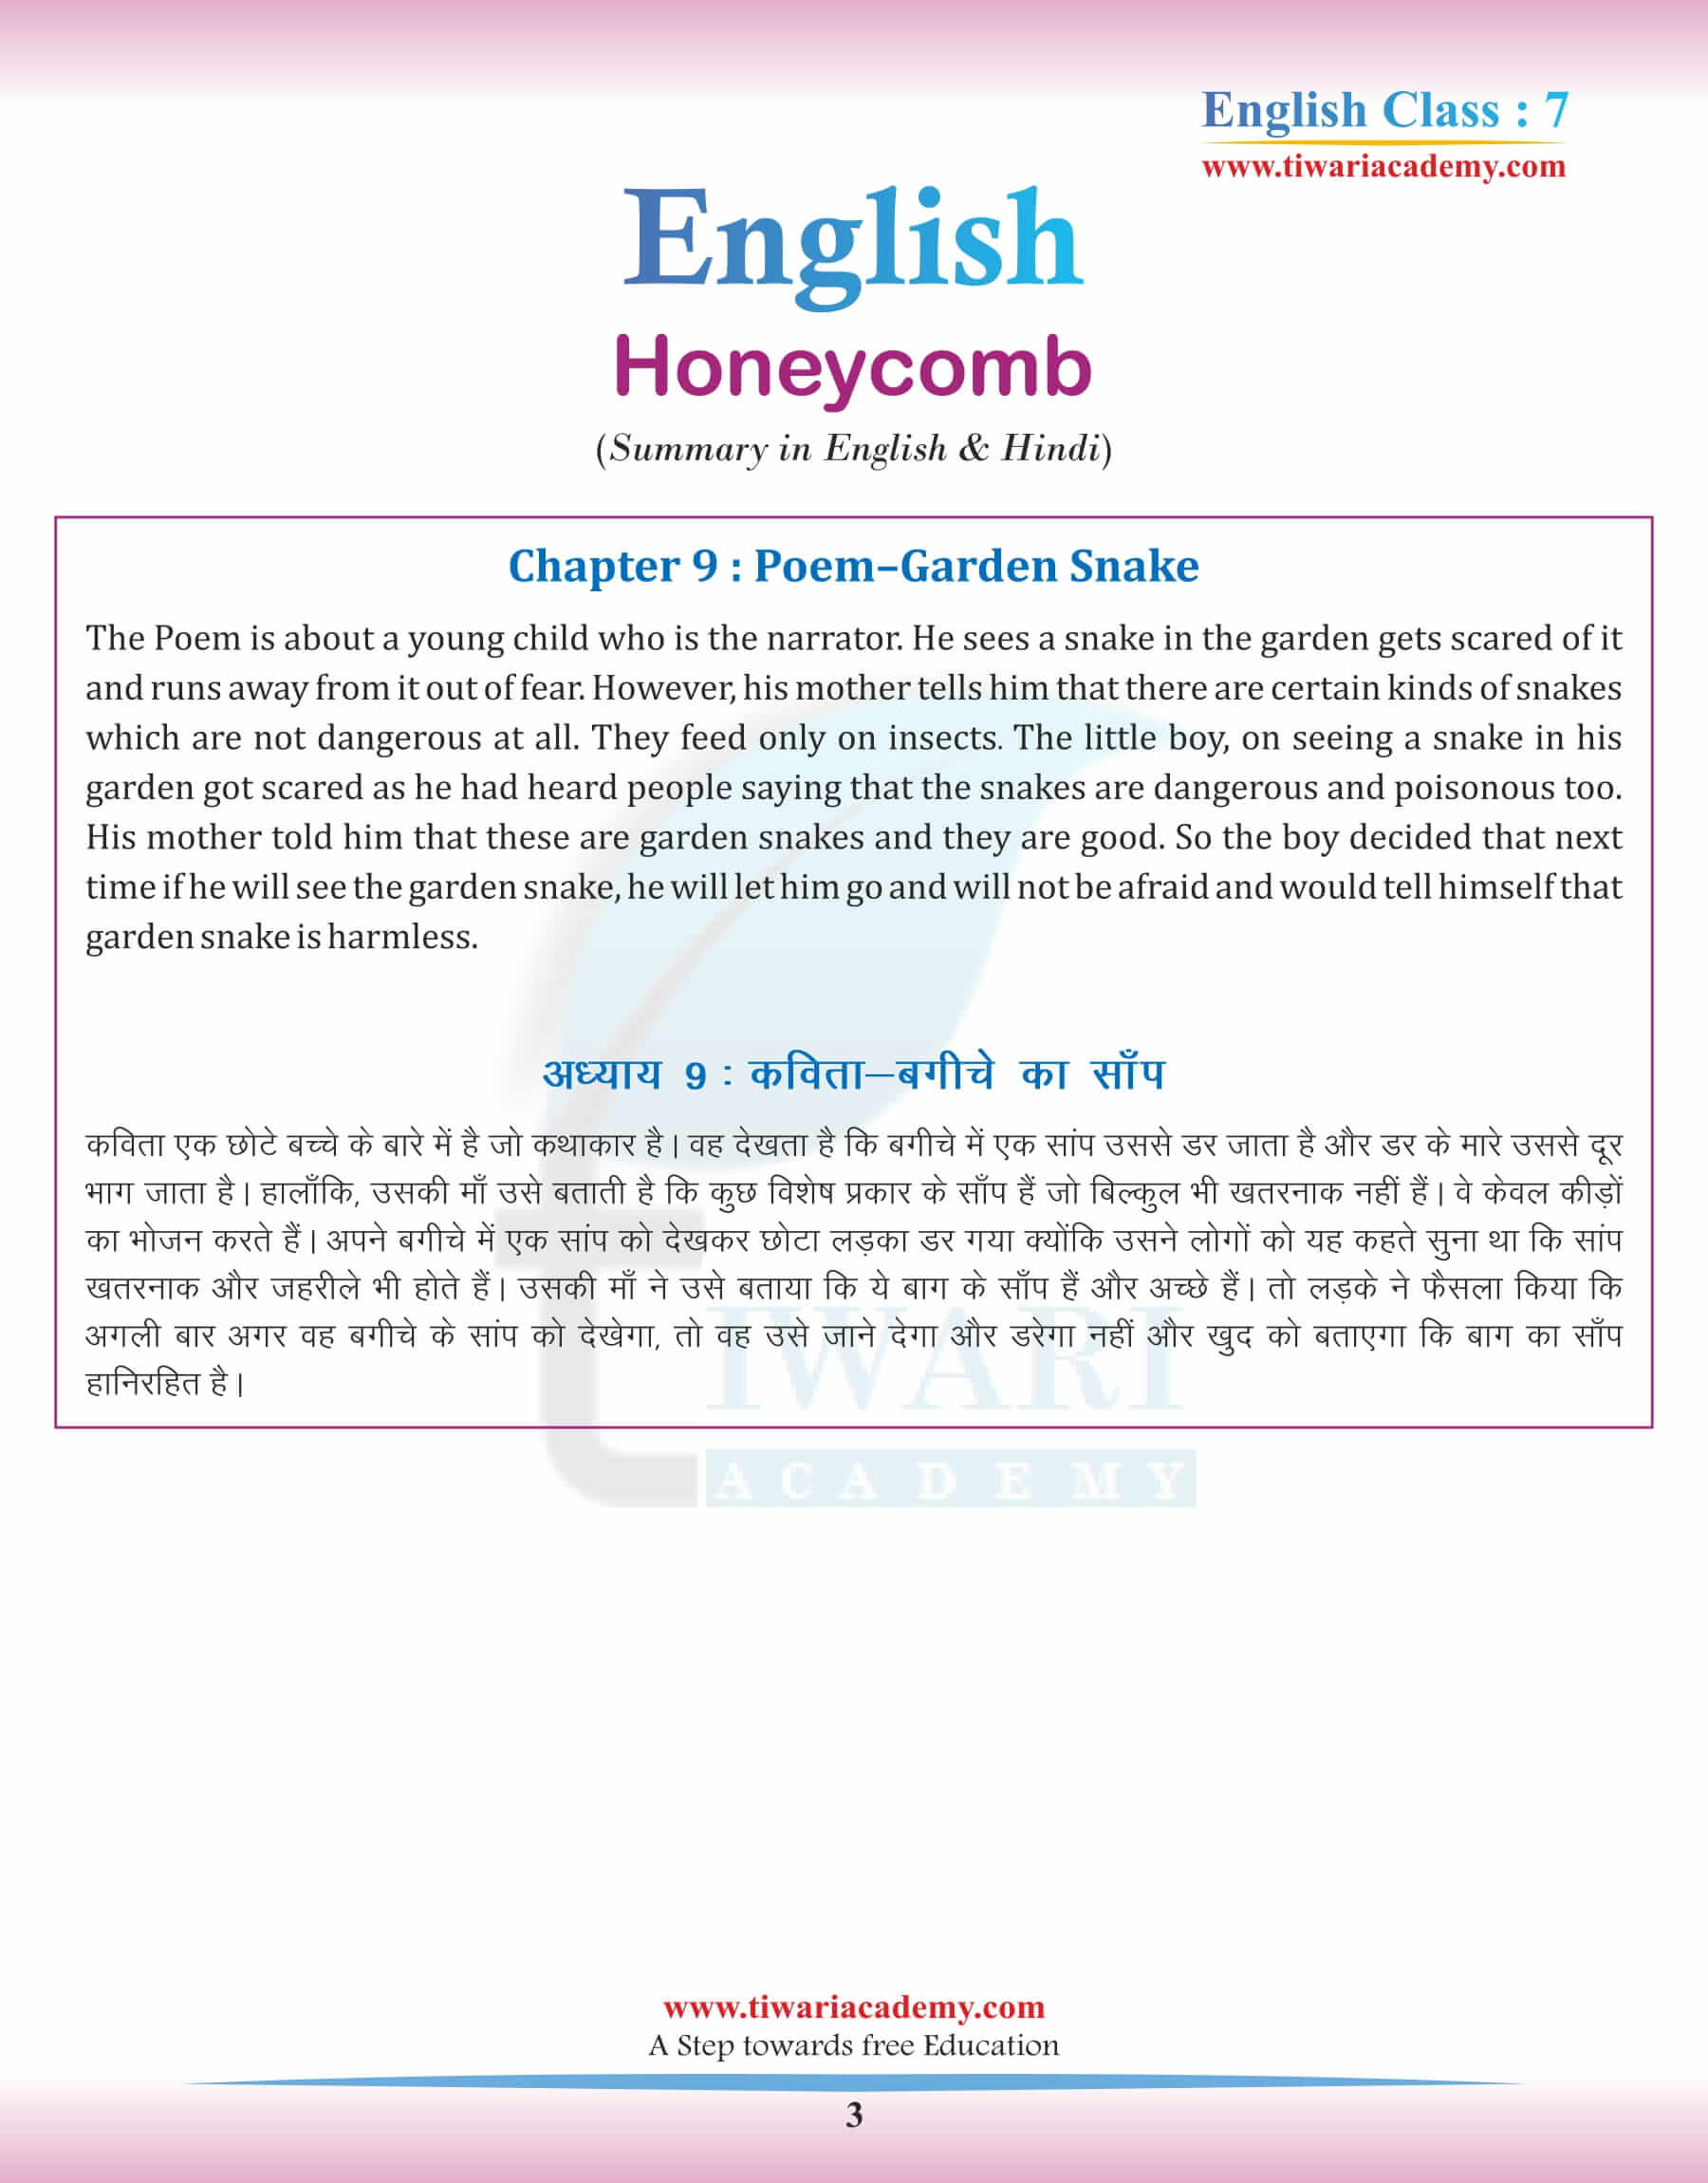 Class 7 English Chapter 9 Summary in Hindi and English